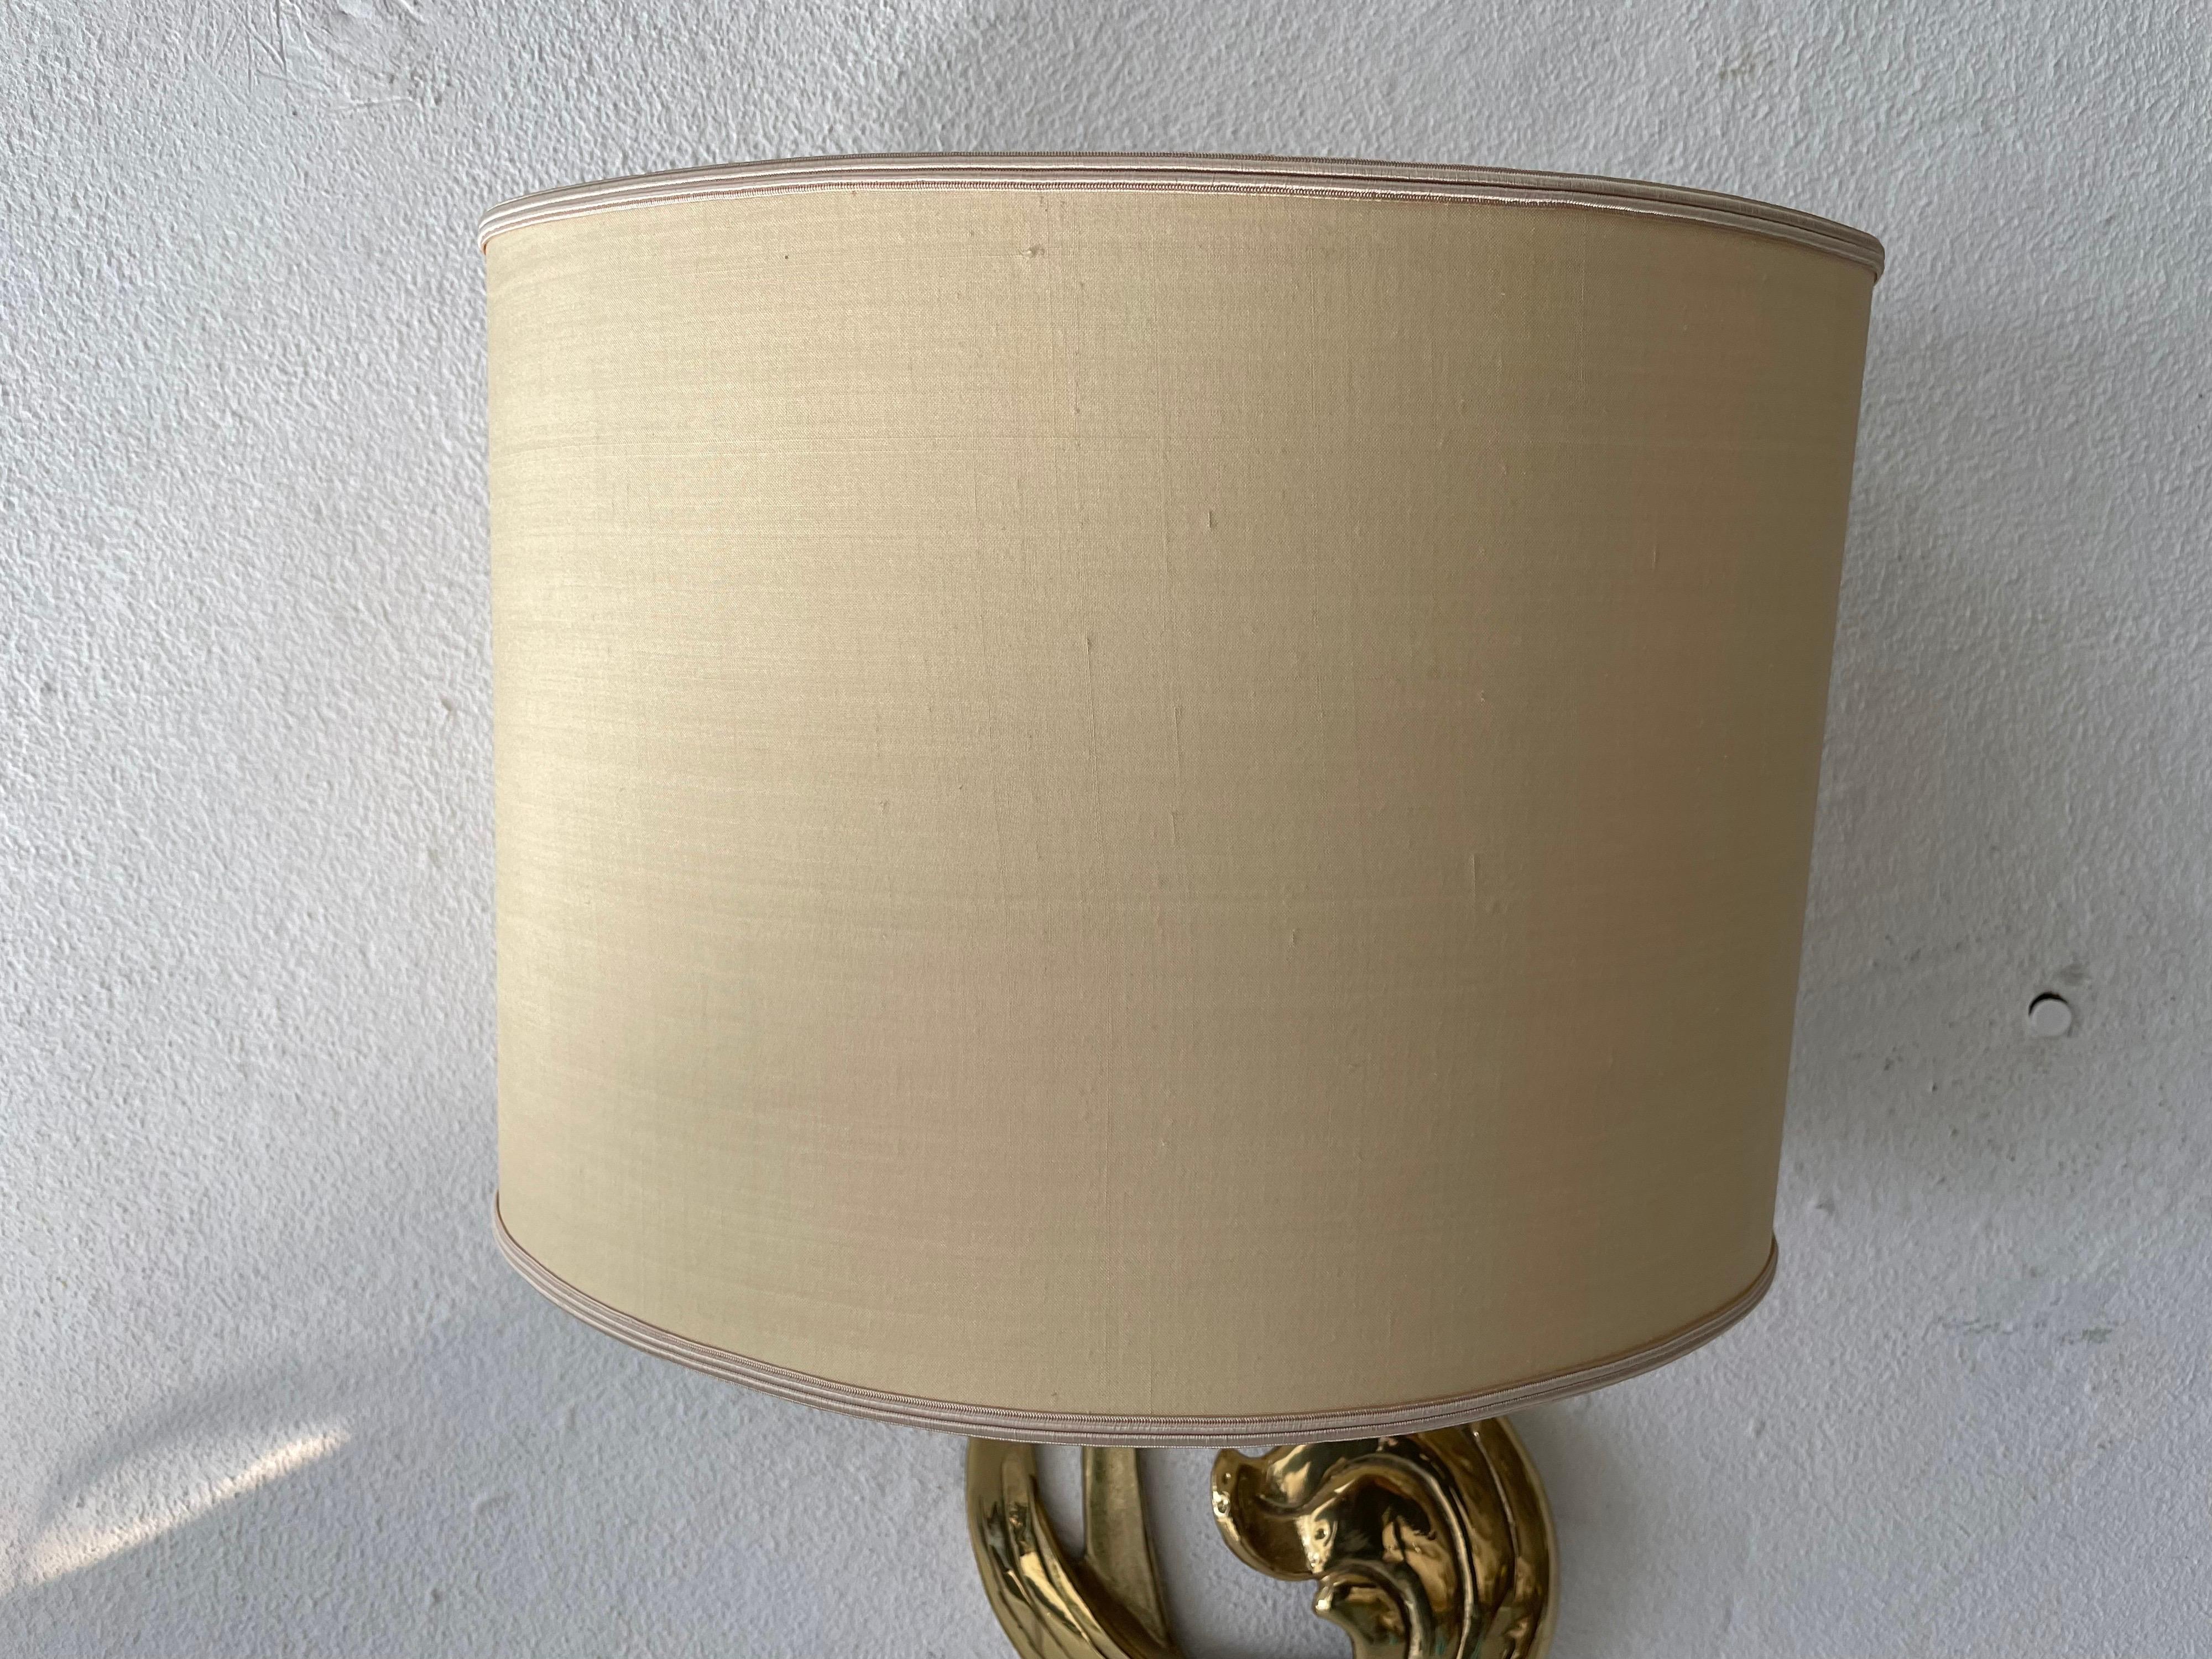 Wonderful flower shaped brass & fabric shade sconce by Hans Möller, 1960s, Germany

Sculptural very elegant rare heavy wall lamp. 

It is very ideal and suitable for all living areas.

Lamp is in good condition. No damage, no crack.
Wear